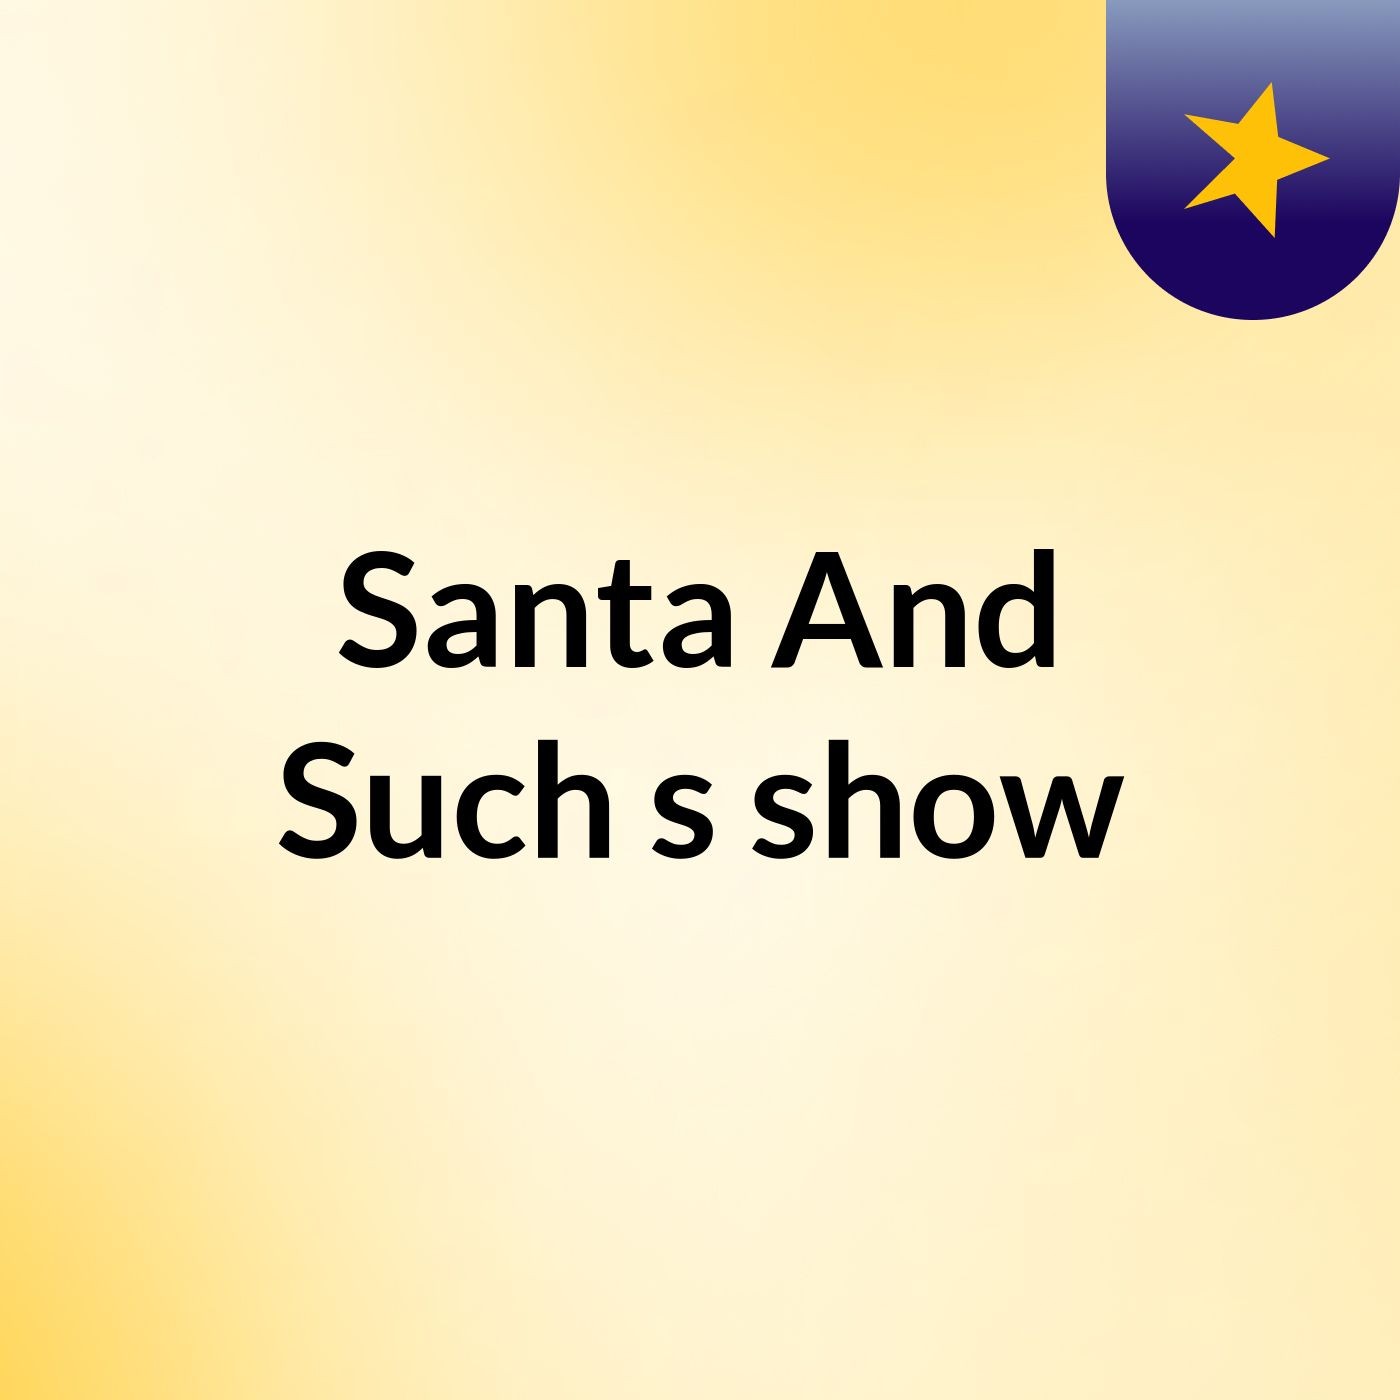 Santa And Such's show